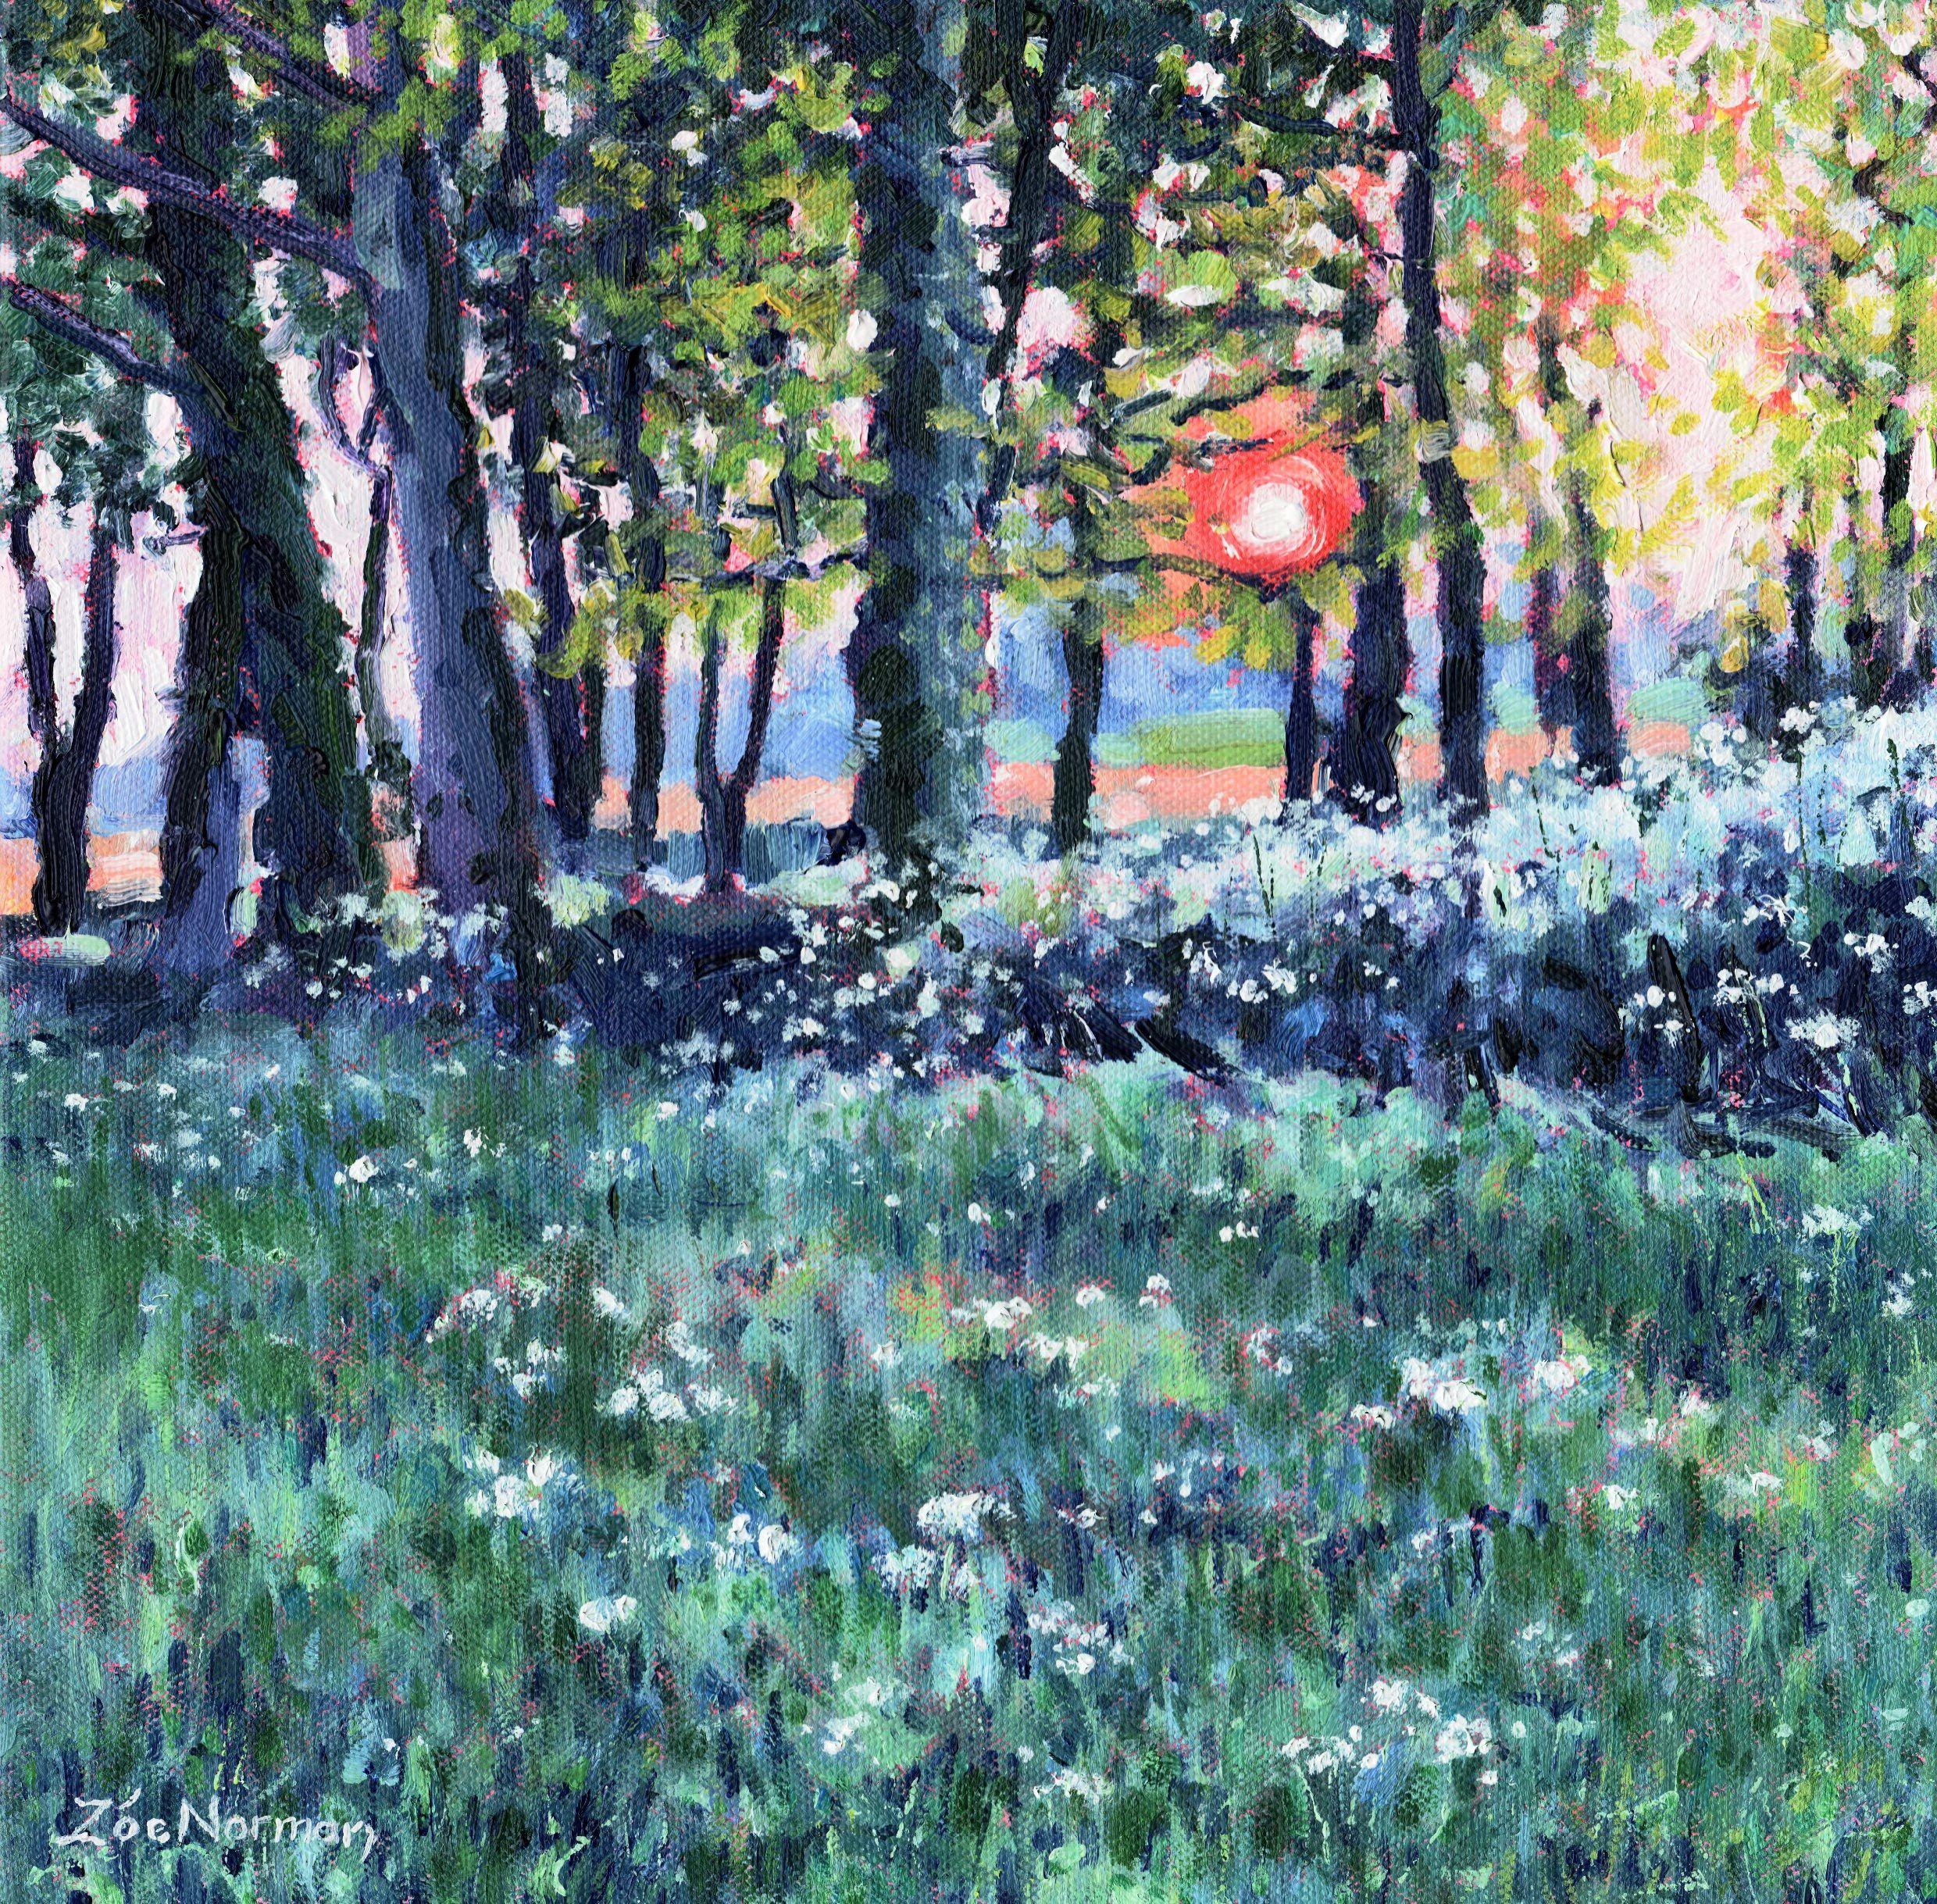 Contemporary Impressionism An evening walk inspired this painting. The lovely blue green and violet hues of the foreground cow parsley and grasses are so evocative of summer. The sun is just sinking behind the distant trees and has a red glowing